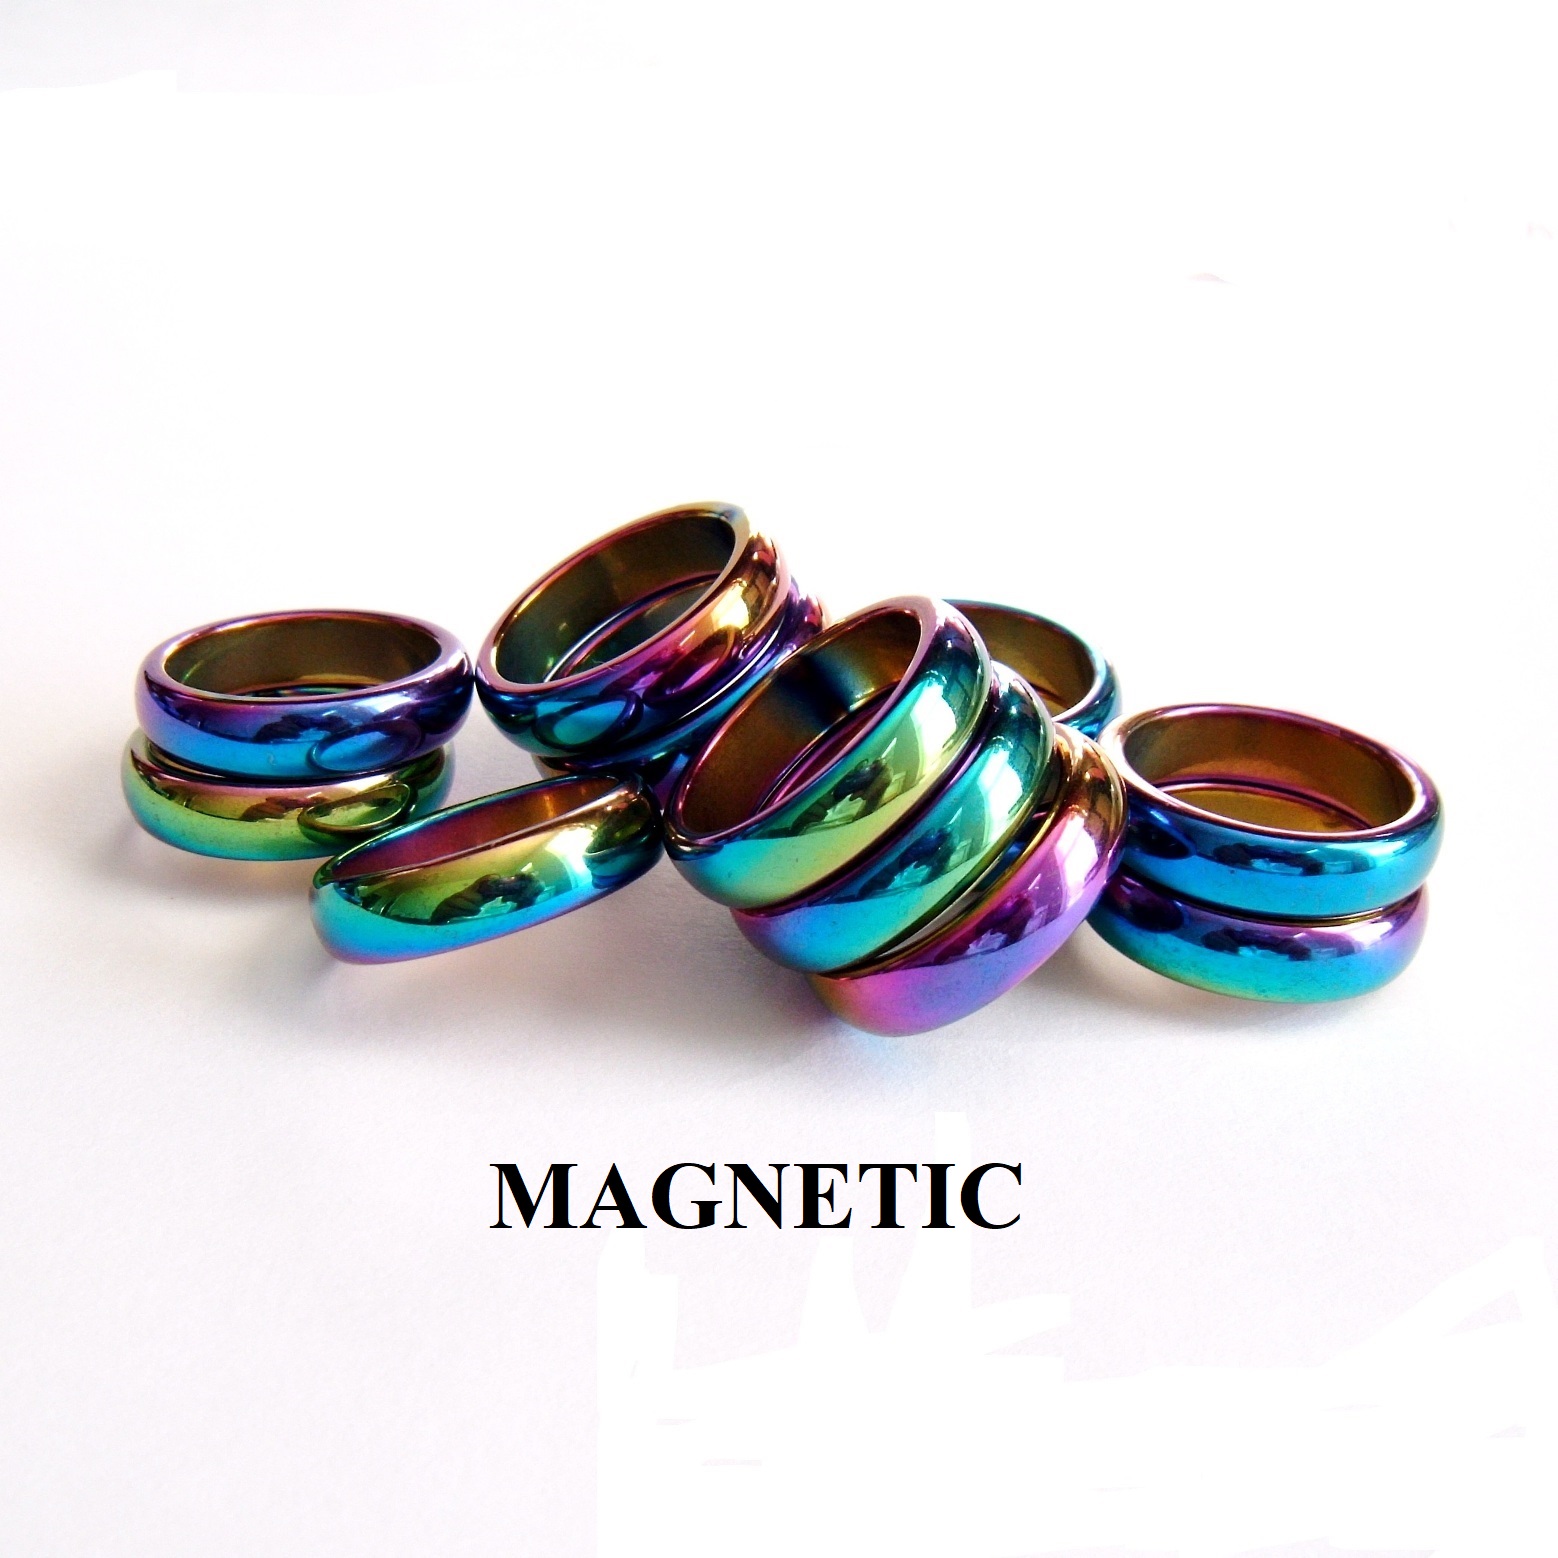 100 PC. MAGNETIC Rainbow Rings Mixed Sizes 6mm Dome Magnetic Rings #RR1654-811-100